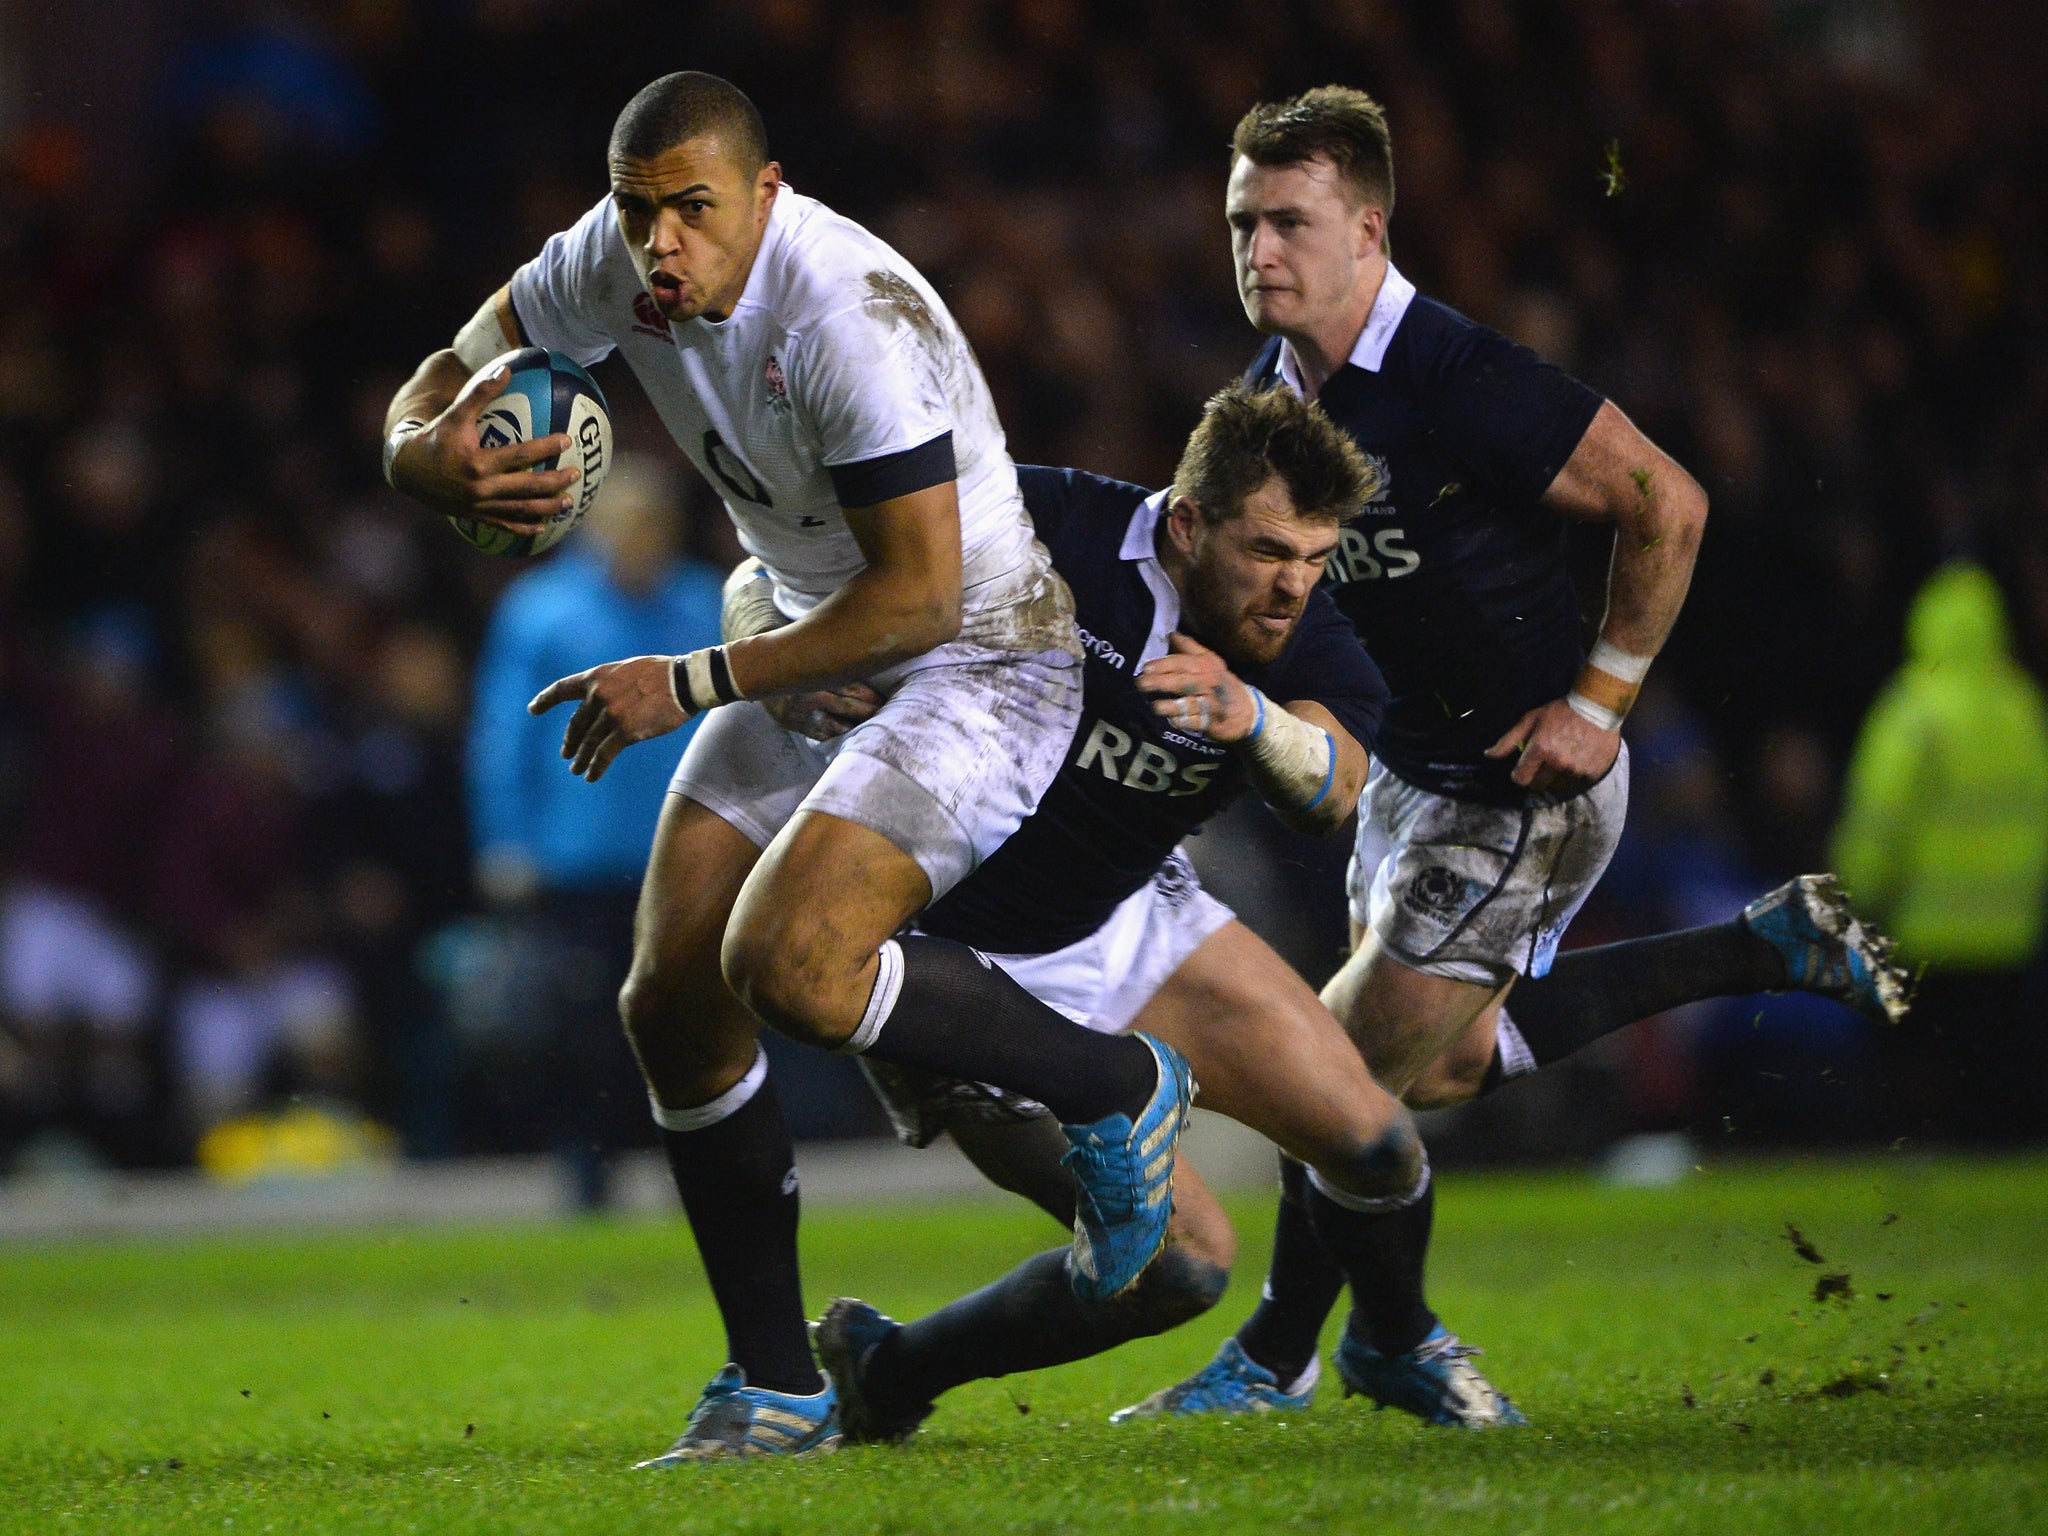 Luther Burrell scored his second try in as many games for England in the 20-0 victory over Scotland